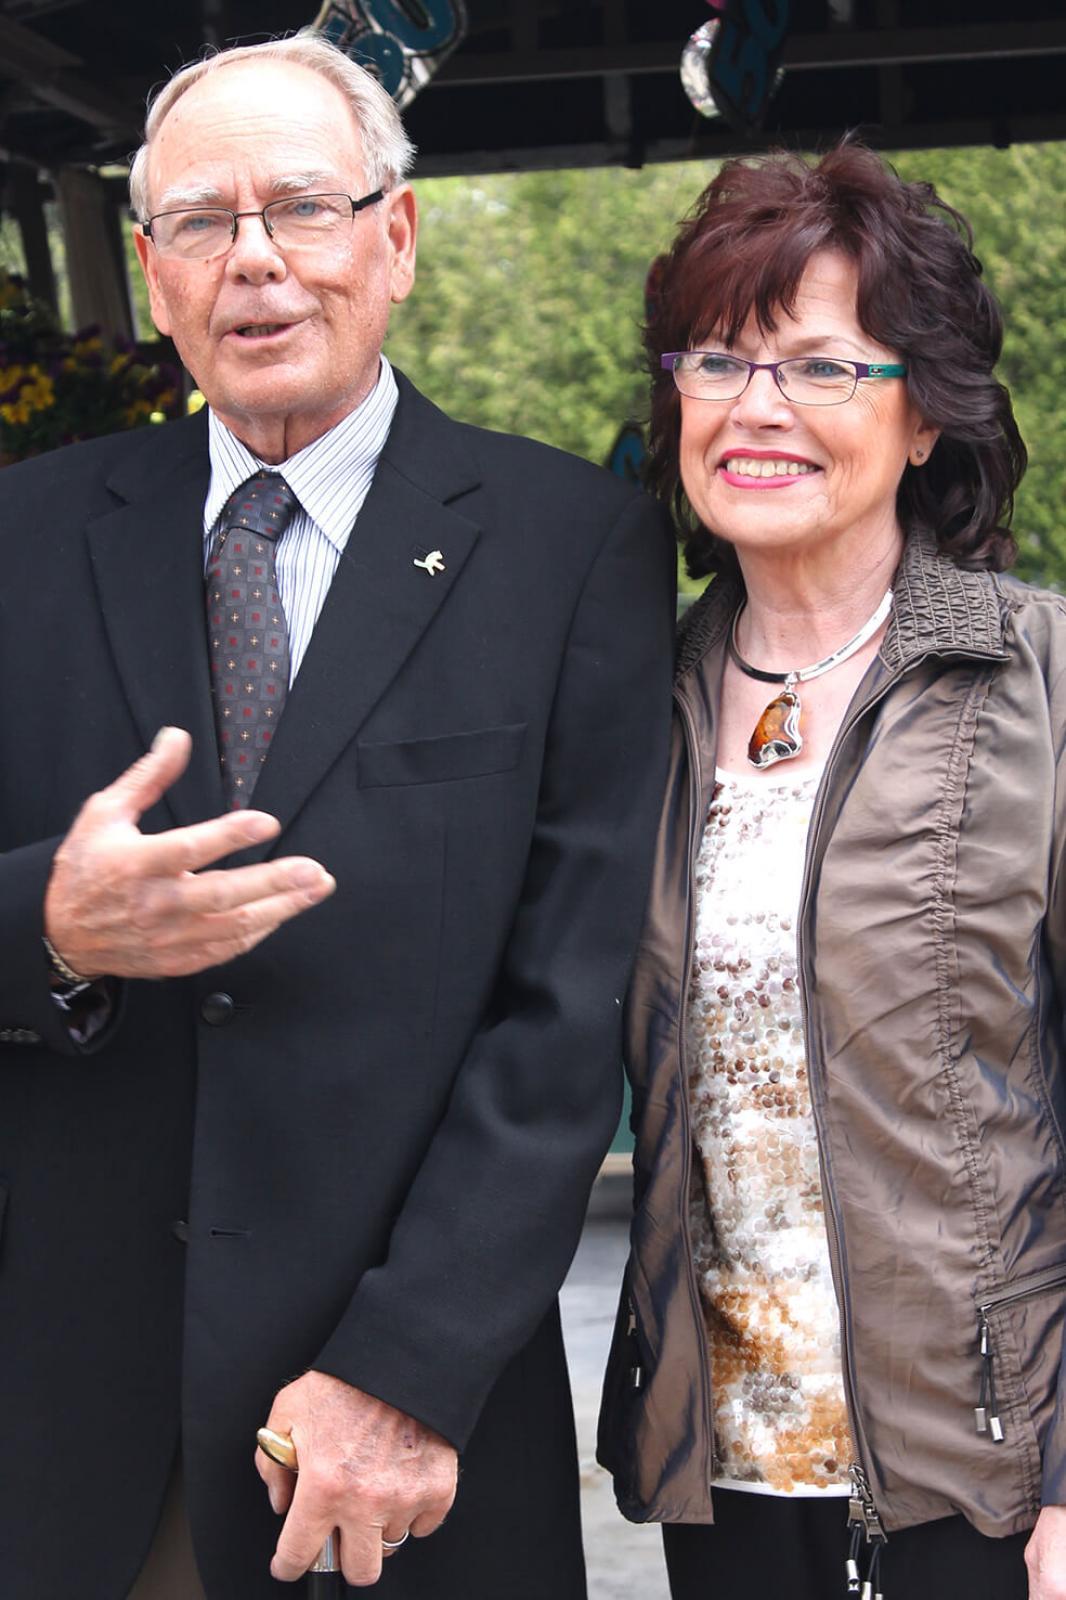 Peter and Doreen Olsen thank the many people who attended Royal City Nursery’s 50th anniversary.